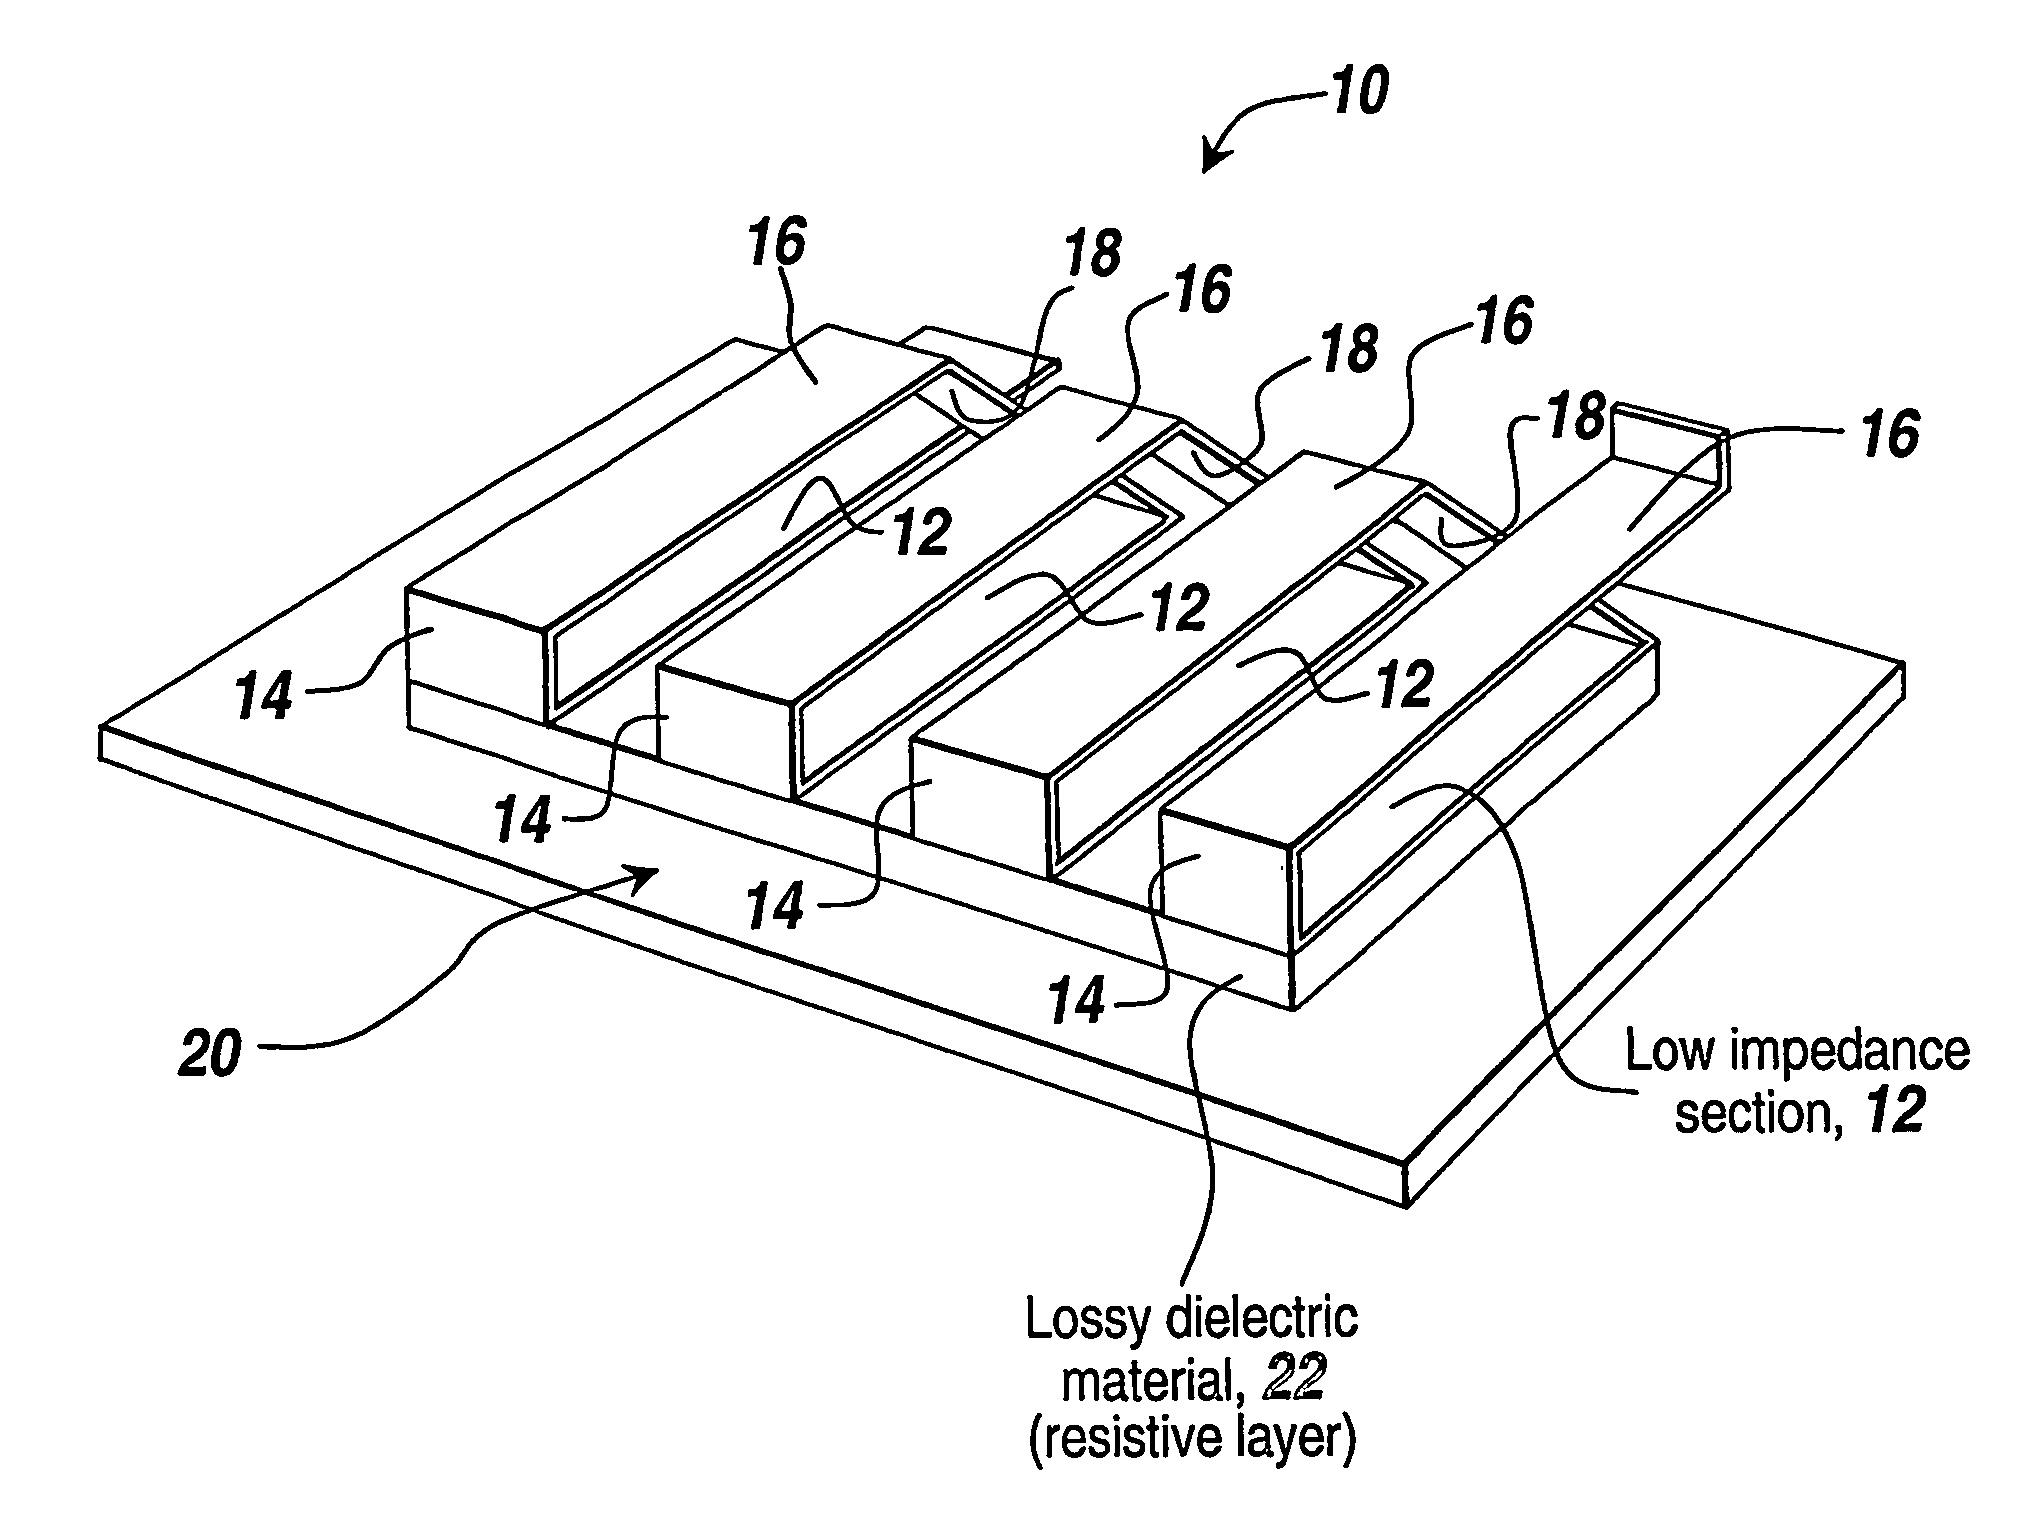 Method and apparatus for limiting VSWR spikes in a compact broadband meander line loaded antenna assembly